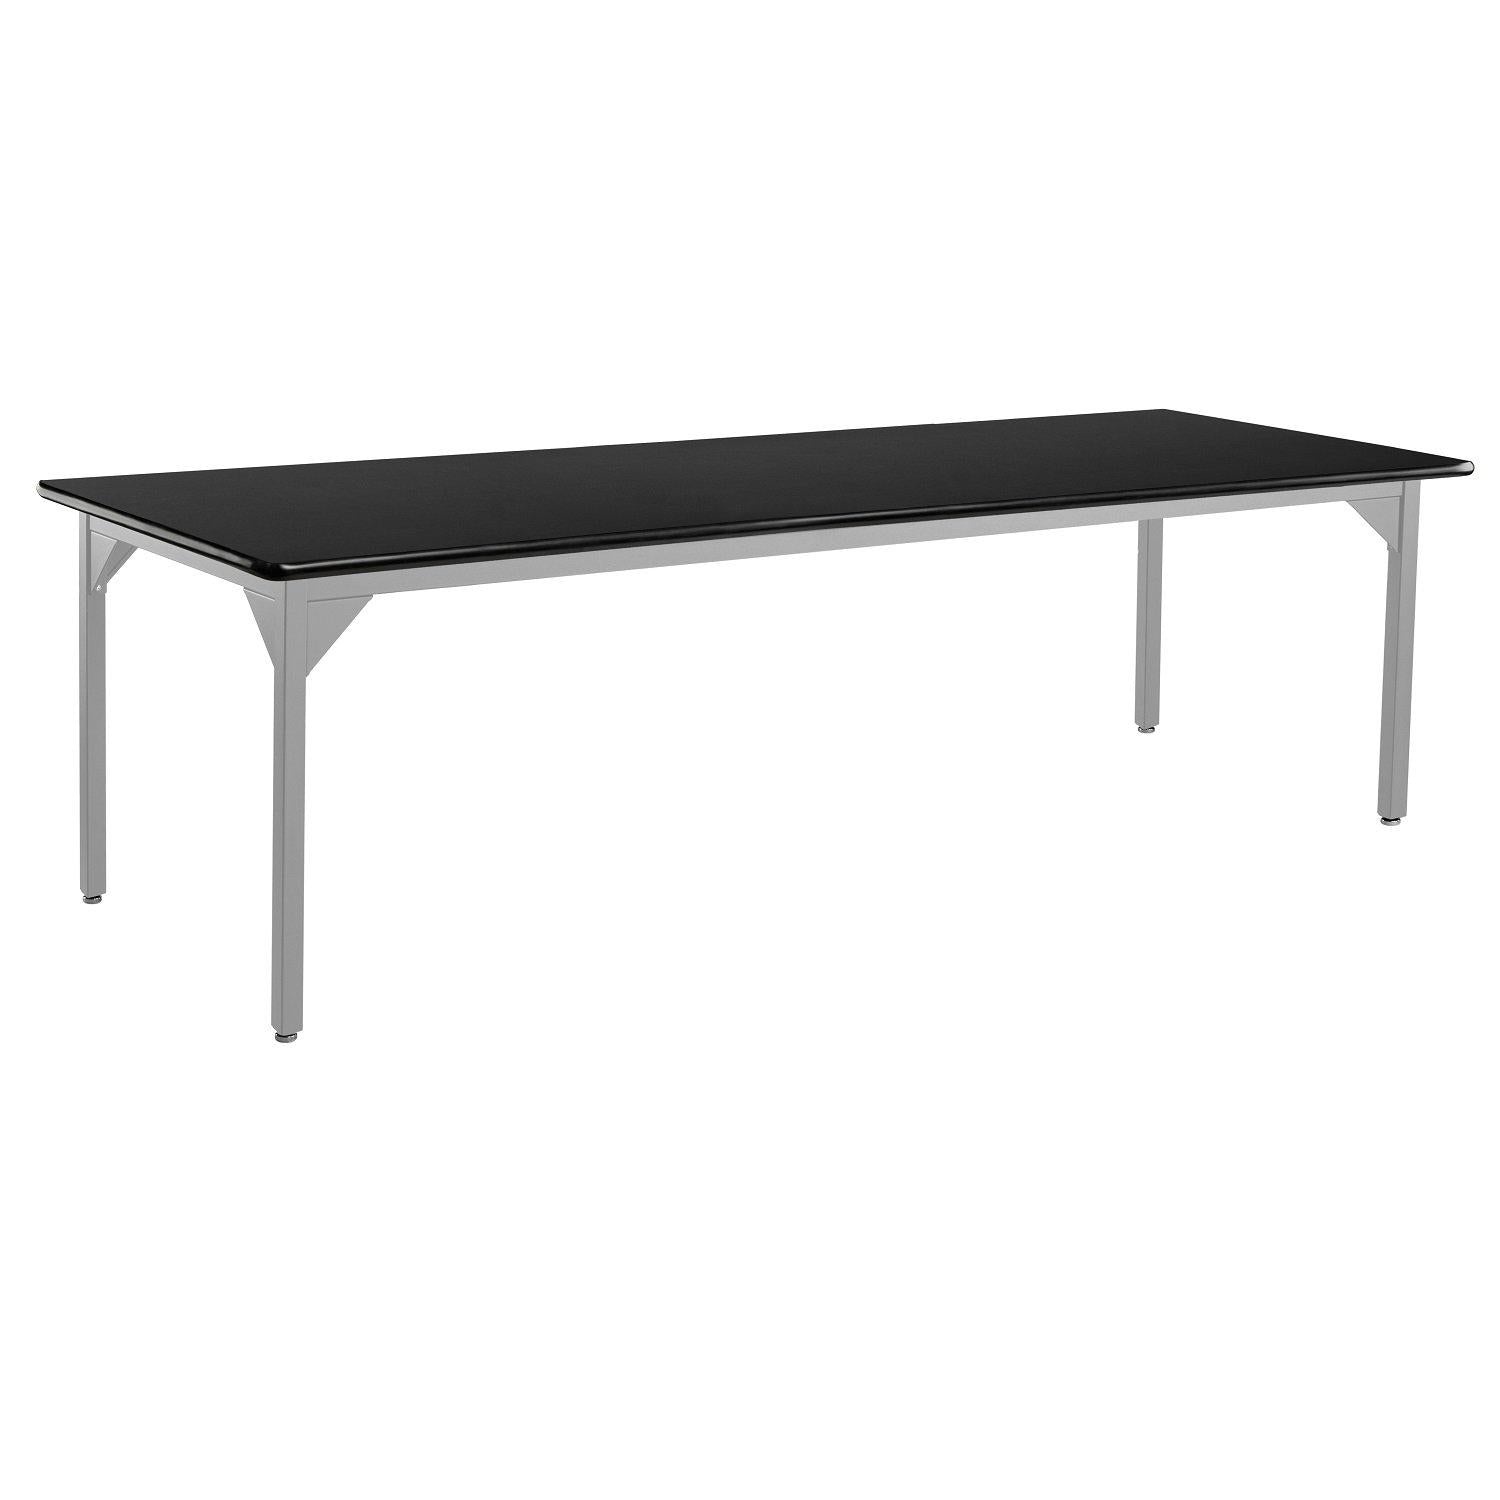 Heavy-Duty Fixed Height Utility Table, Soft Grey Frame, 48" x 96", High-Pressure Laminate Top with T-Mold Edge